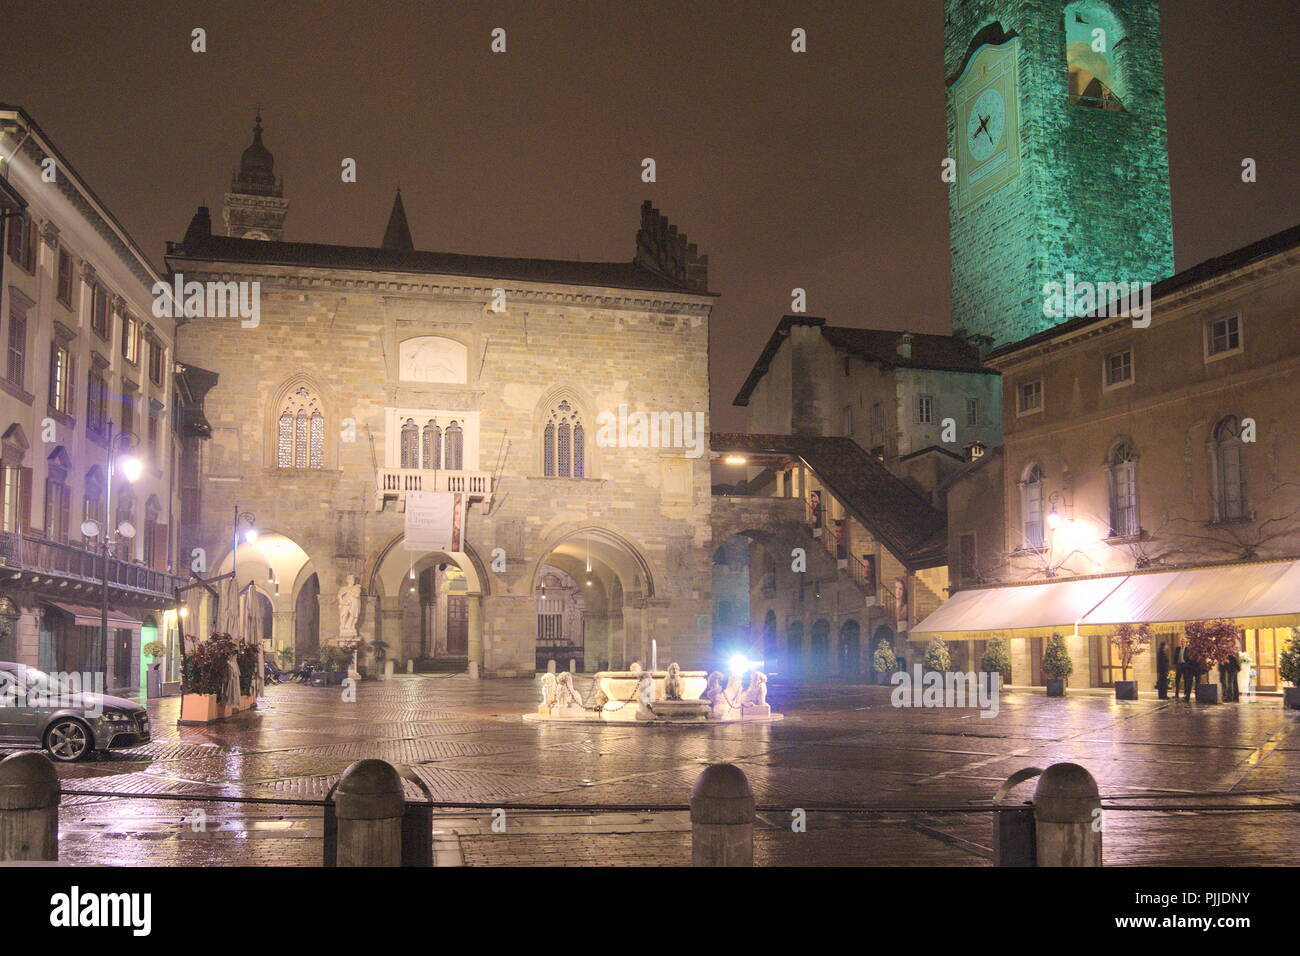 Italy, the historic old town of Bergamo.  The Piazza Vecchia  is lit up on a rainy winters evening Stock Photo